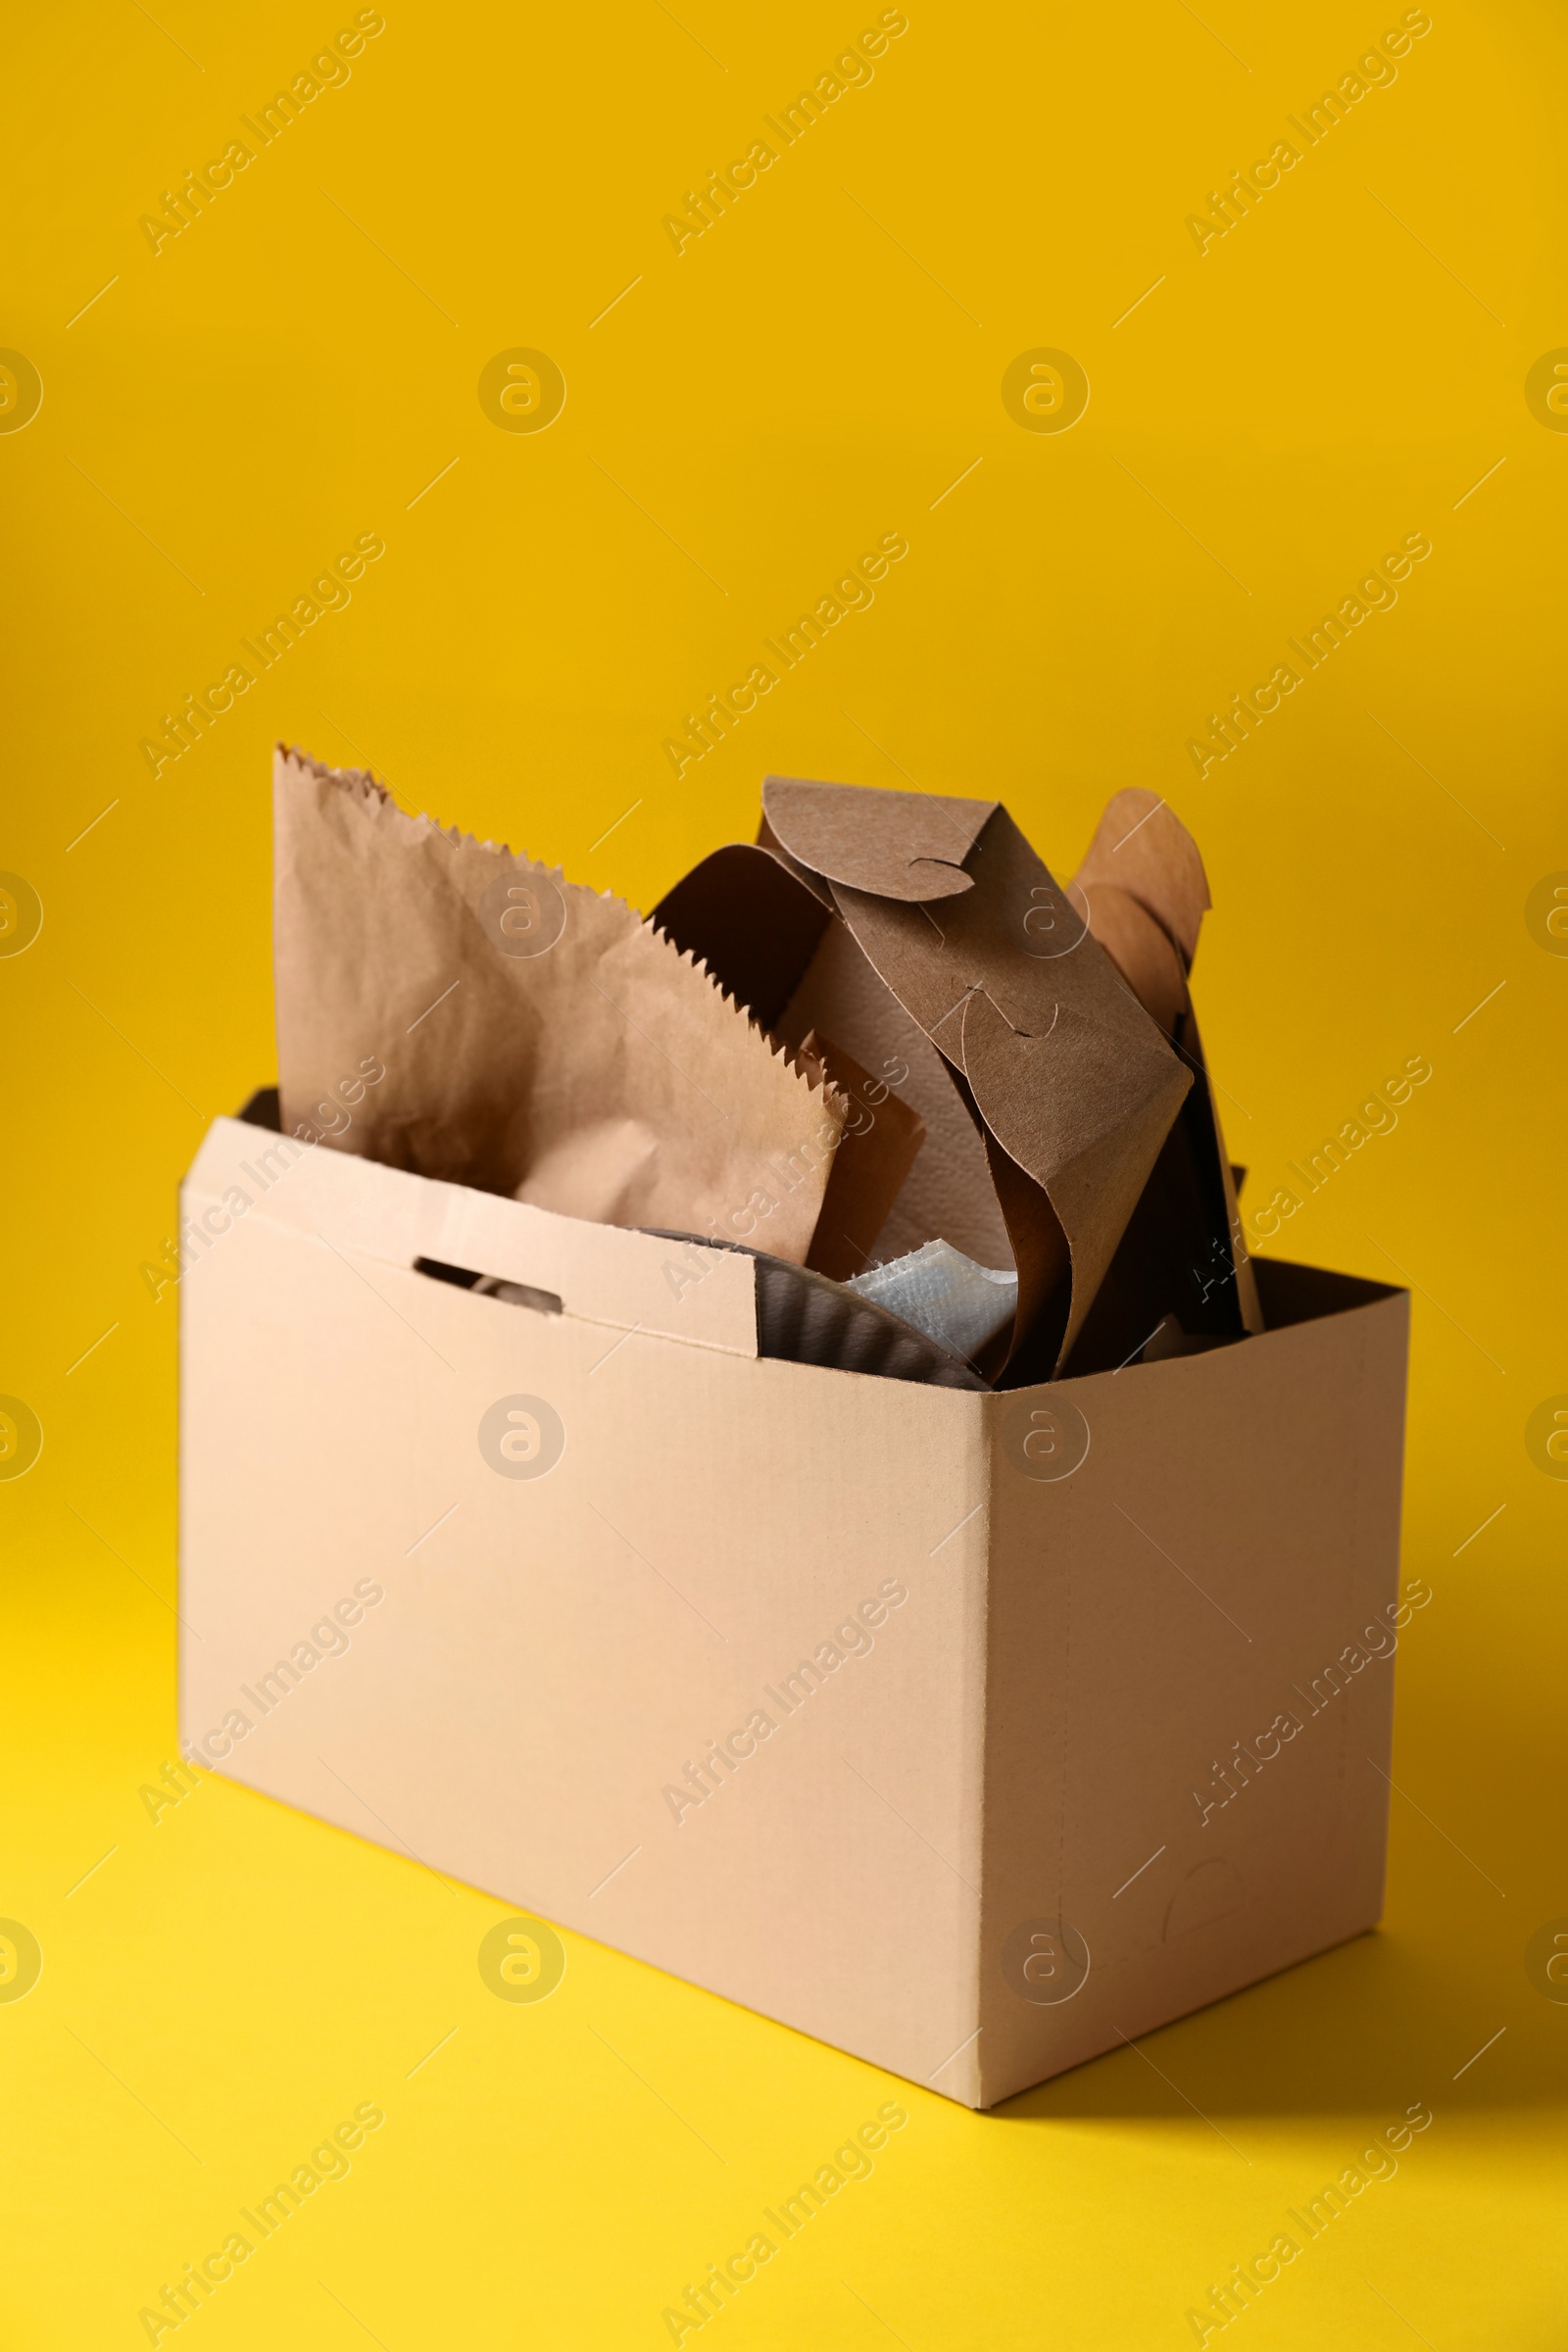 Photo of Box with waste paper on yellow background